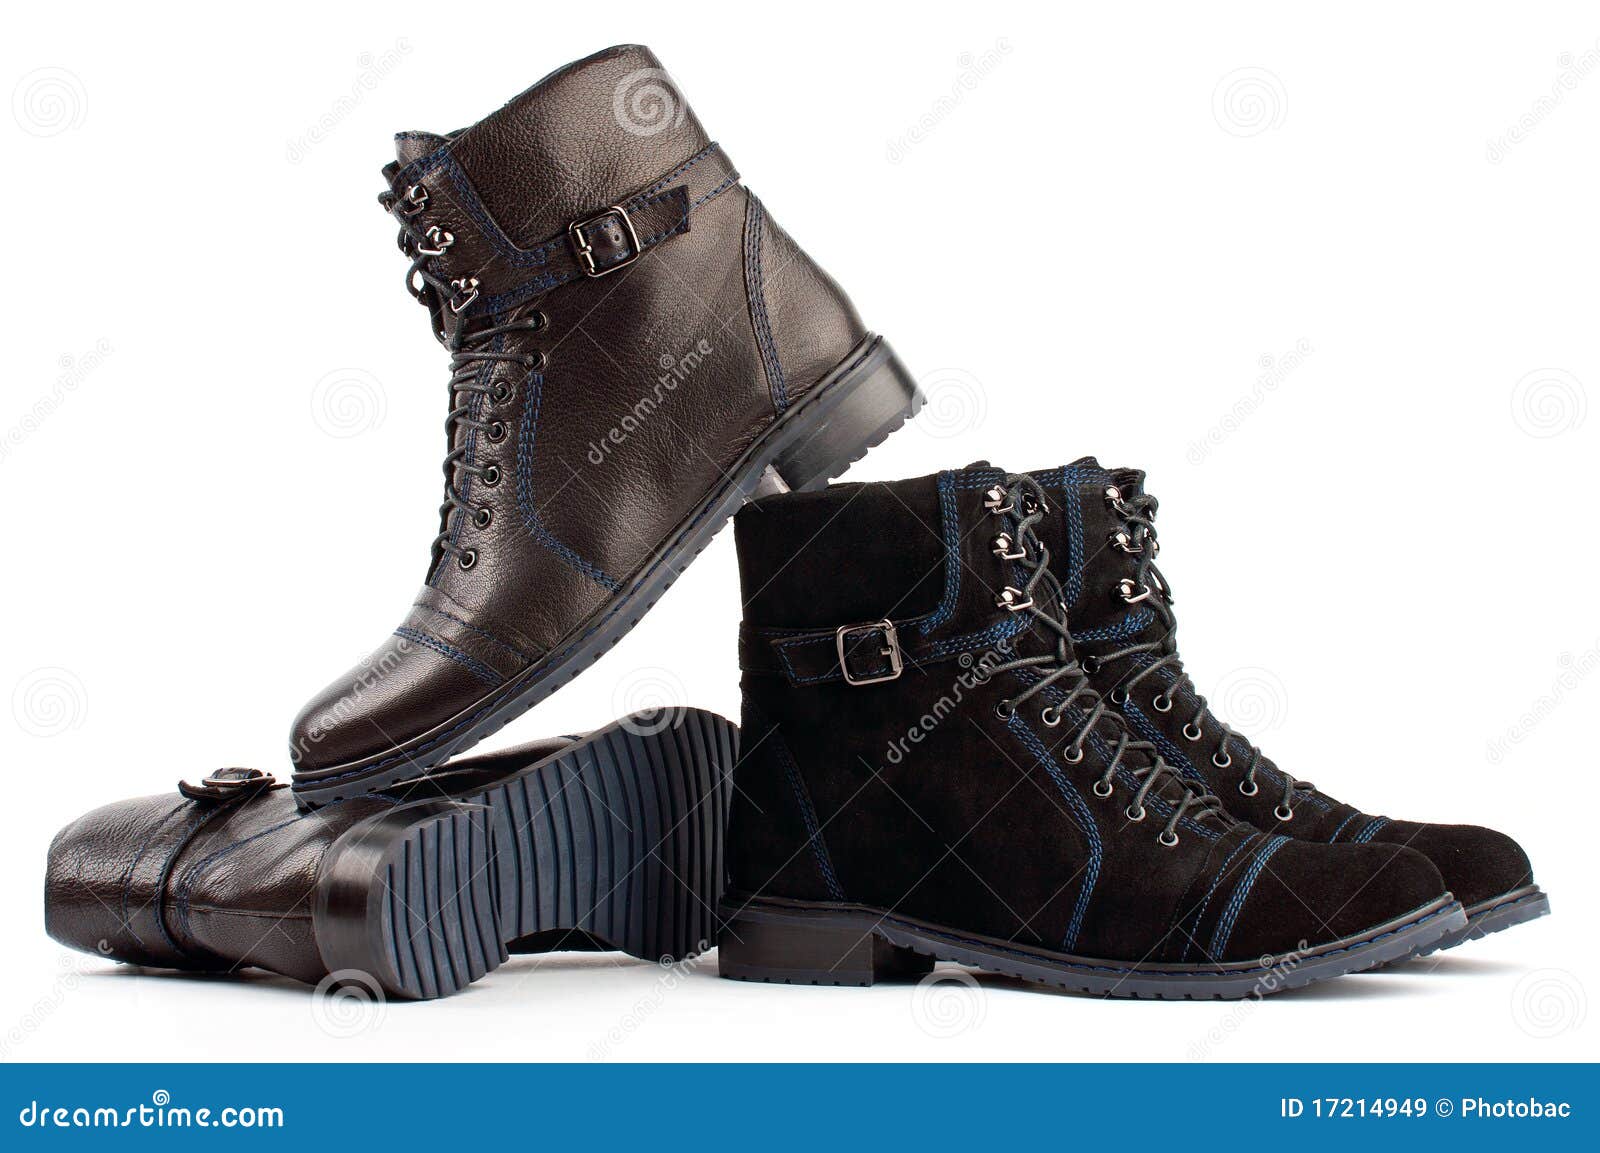 Two Pairs of Black Laced Boots Stock Image - Image of outfit, sole ...